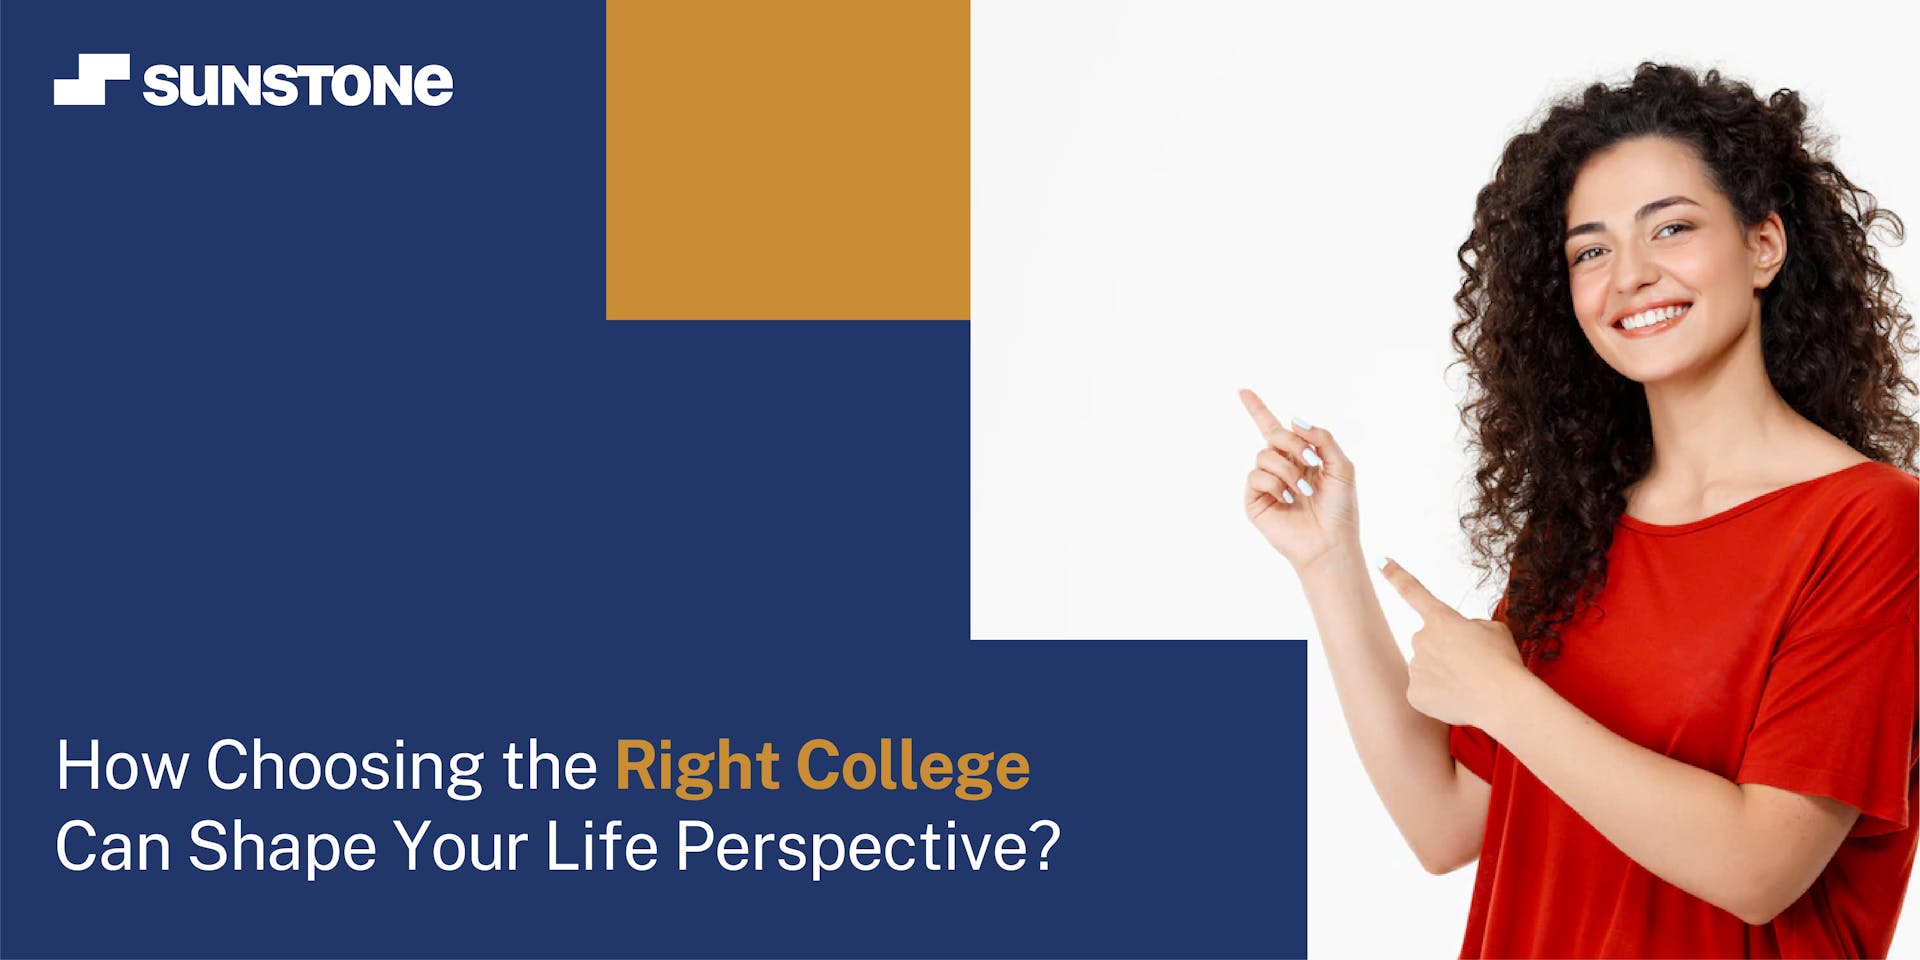 How Choosing the Right College Can Shape Your Life Perspective?